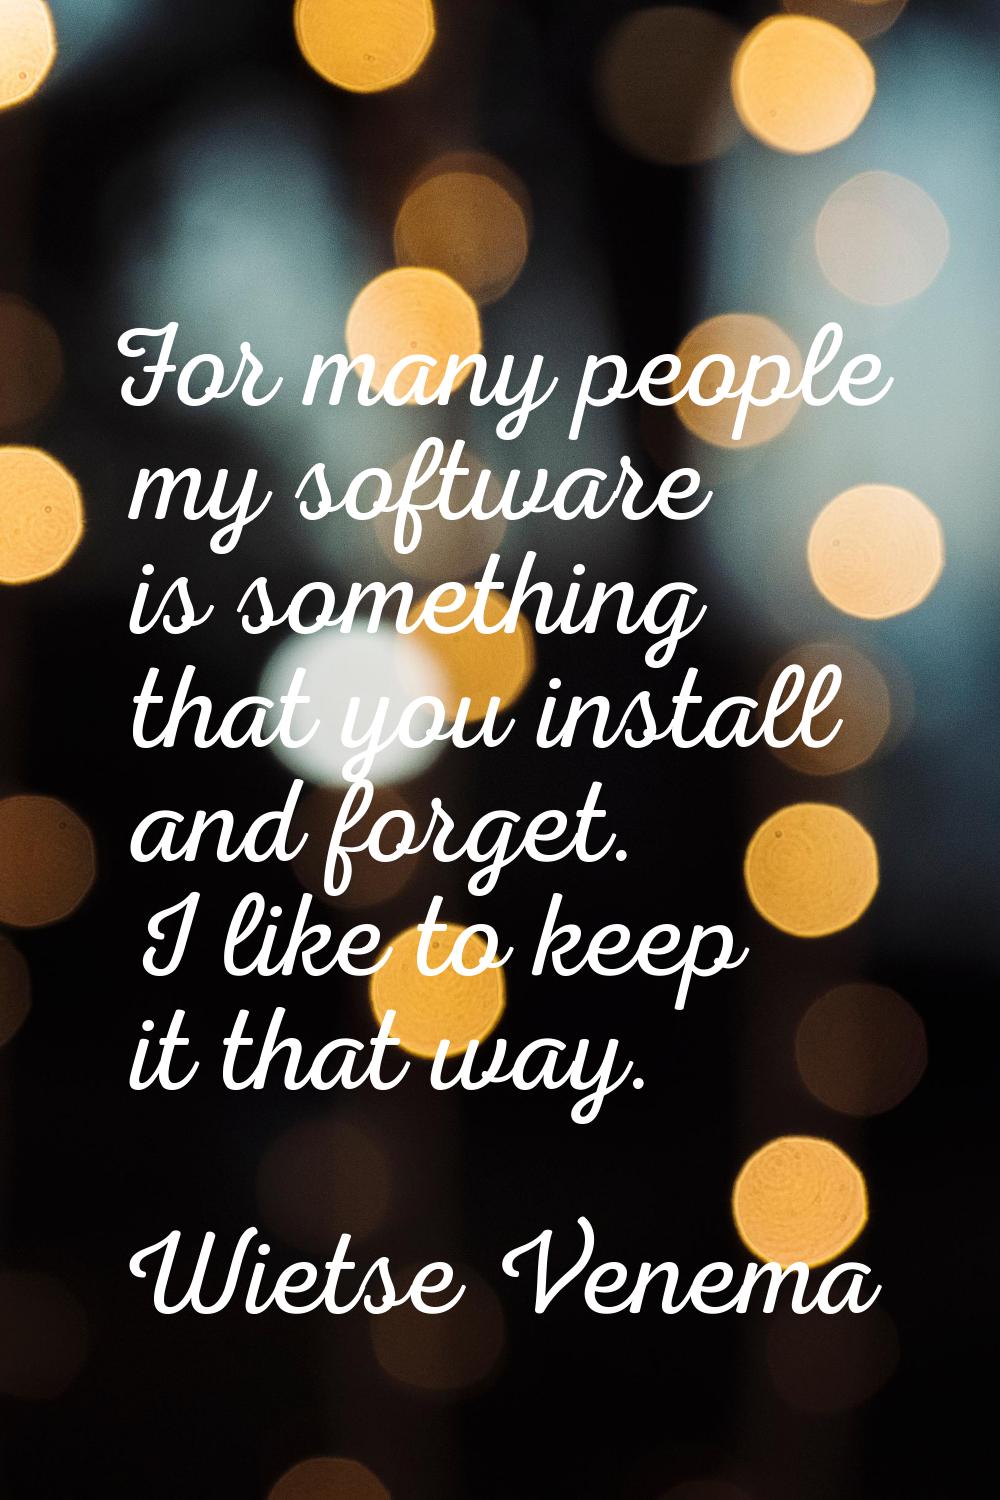 For many people my software is something that you install and forget. I like to keep it that way.